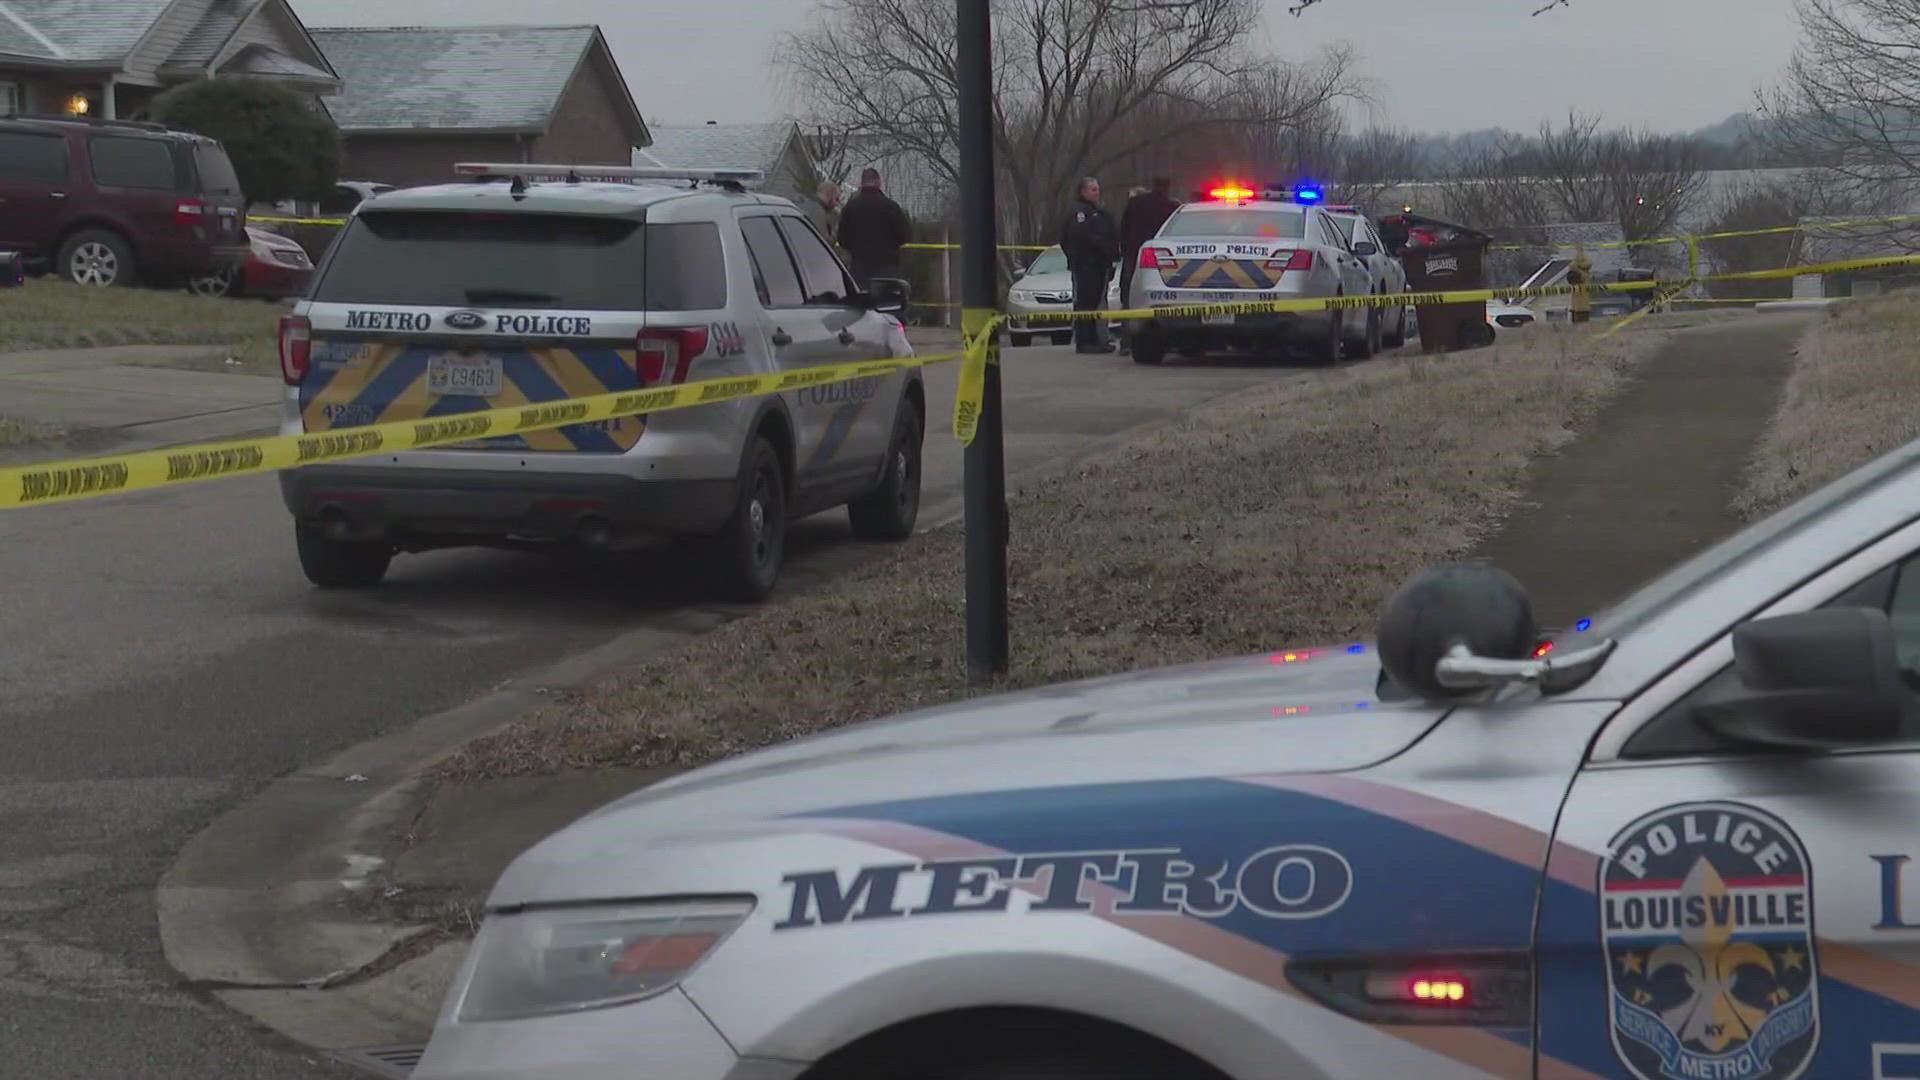 Police said the victim was shot outside of a home in the 6700 block of Leverett Lane Tuesday afternoon.